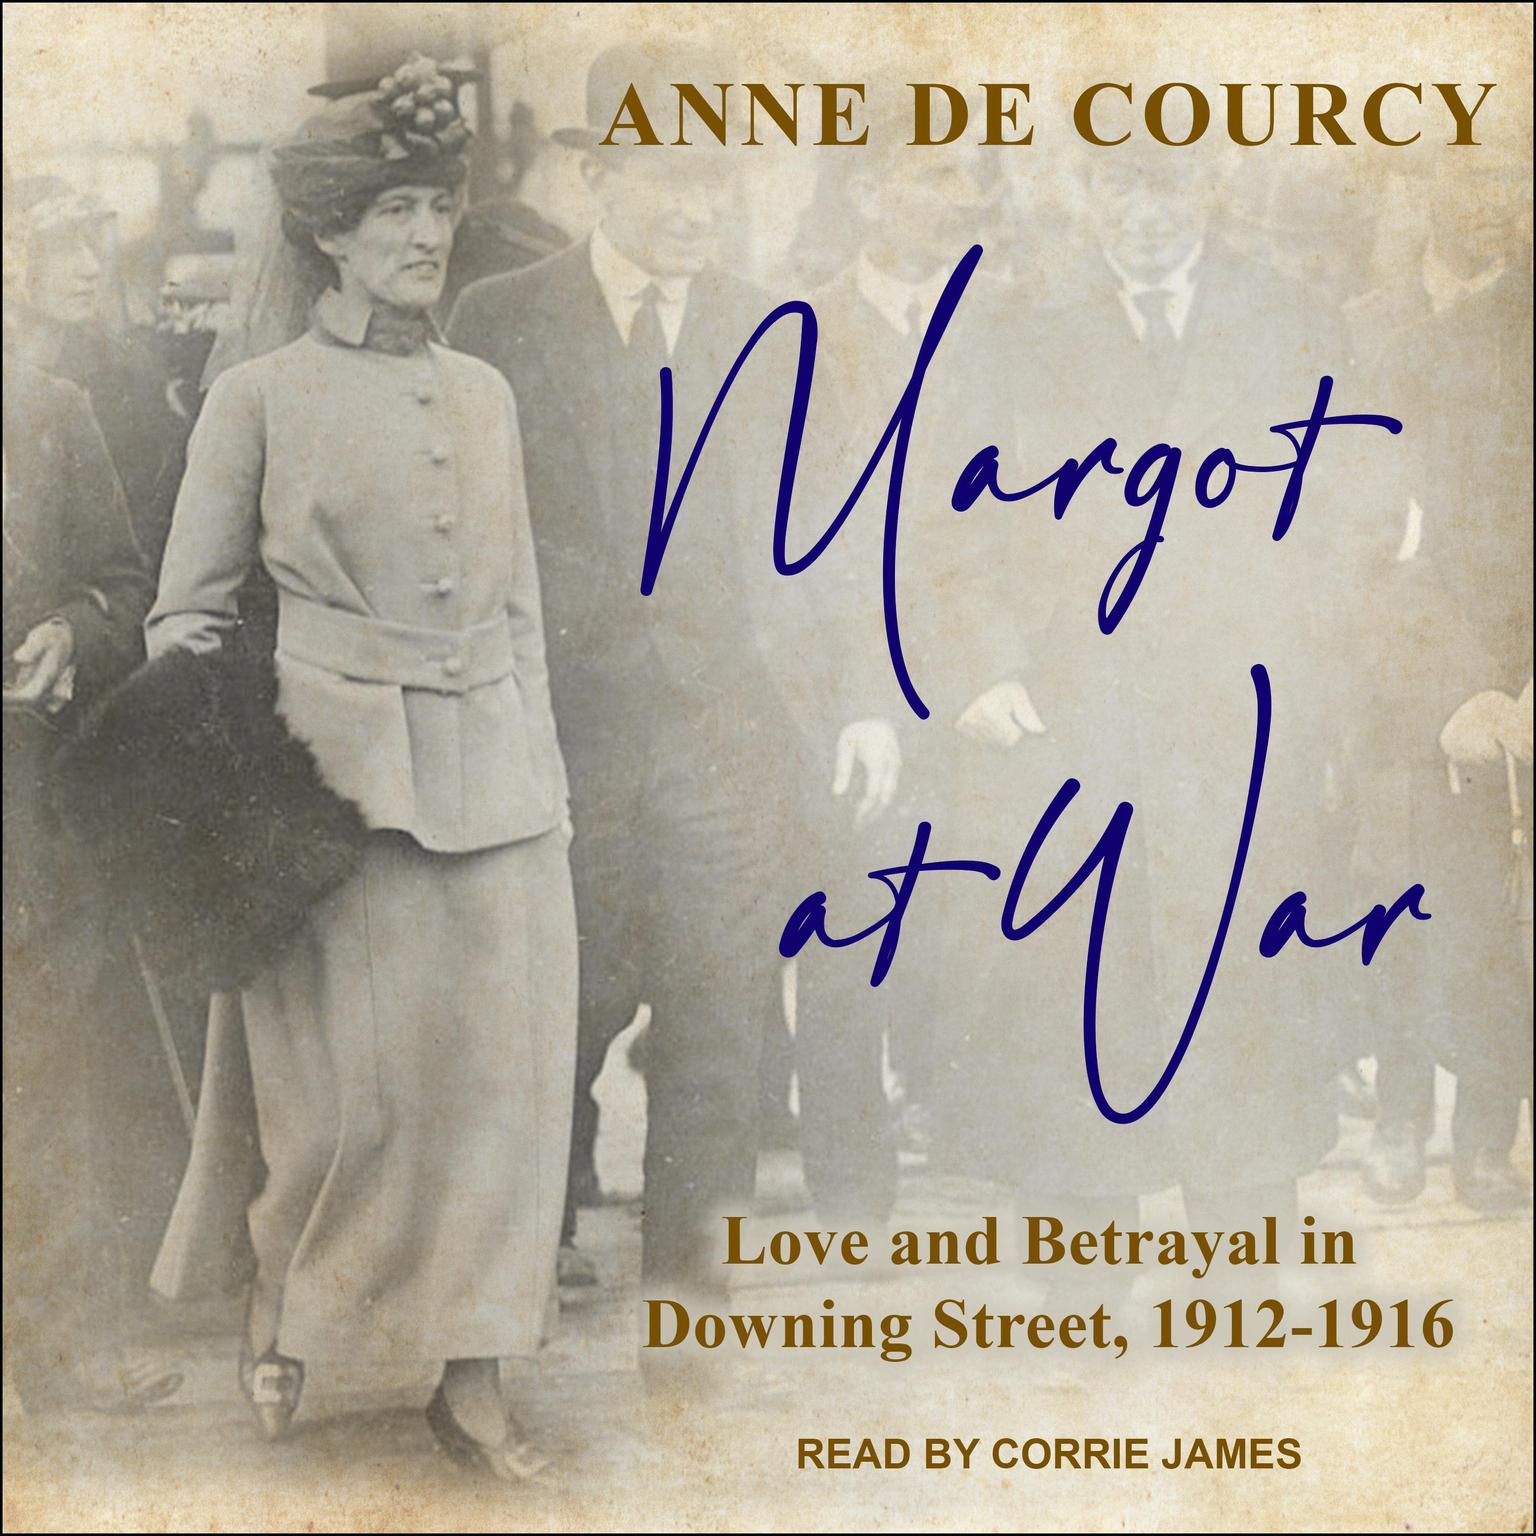 Margot at War: Love and Betrayal in Downing Street, 1912-1916 Audiobook, by Anne de Courcy